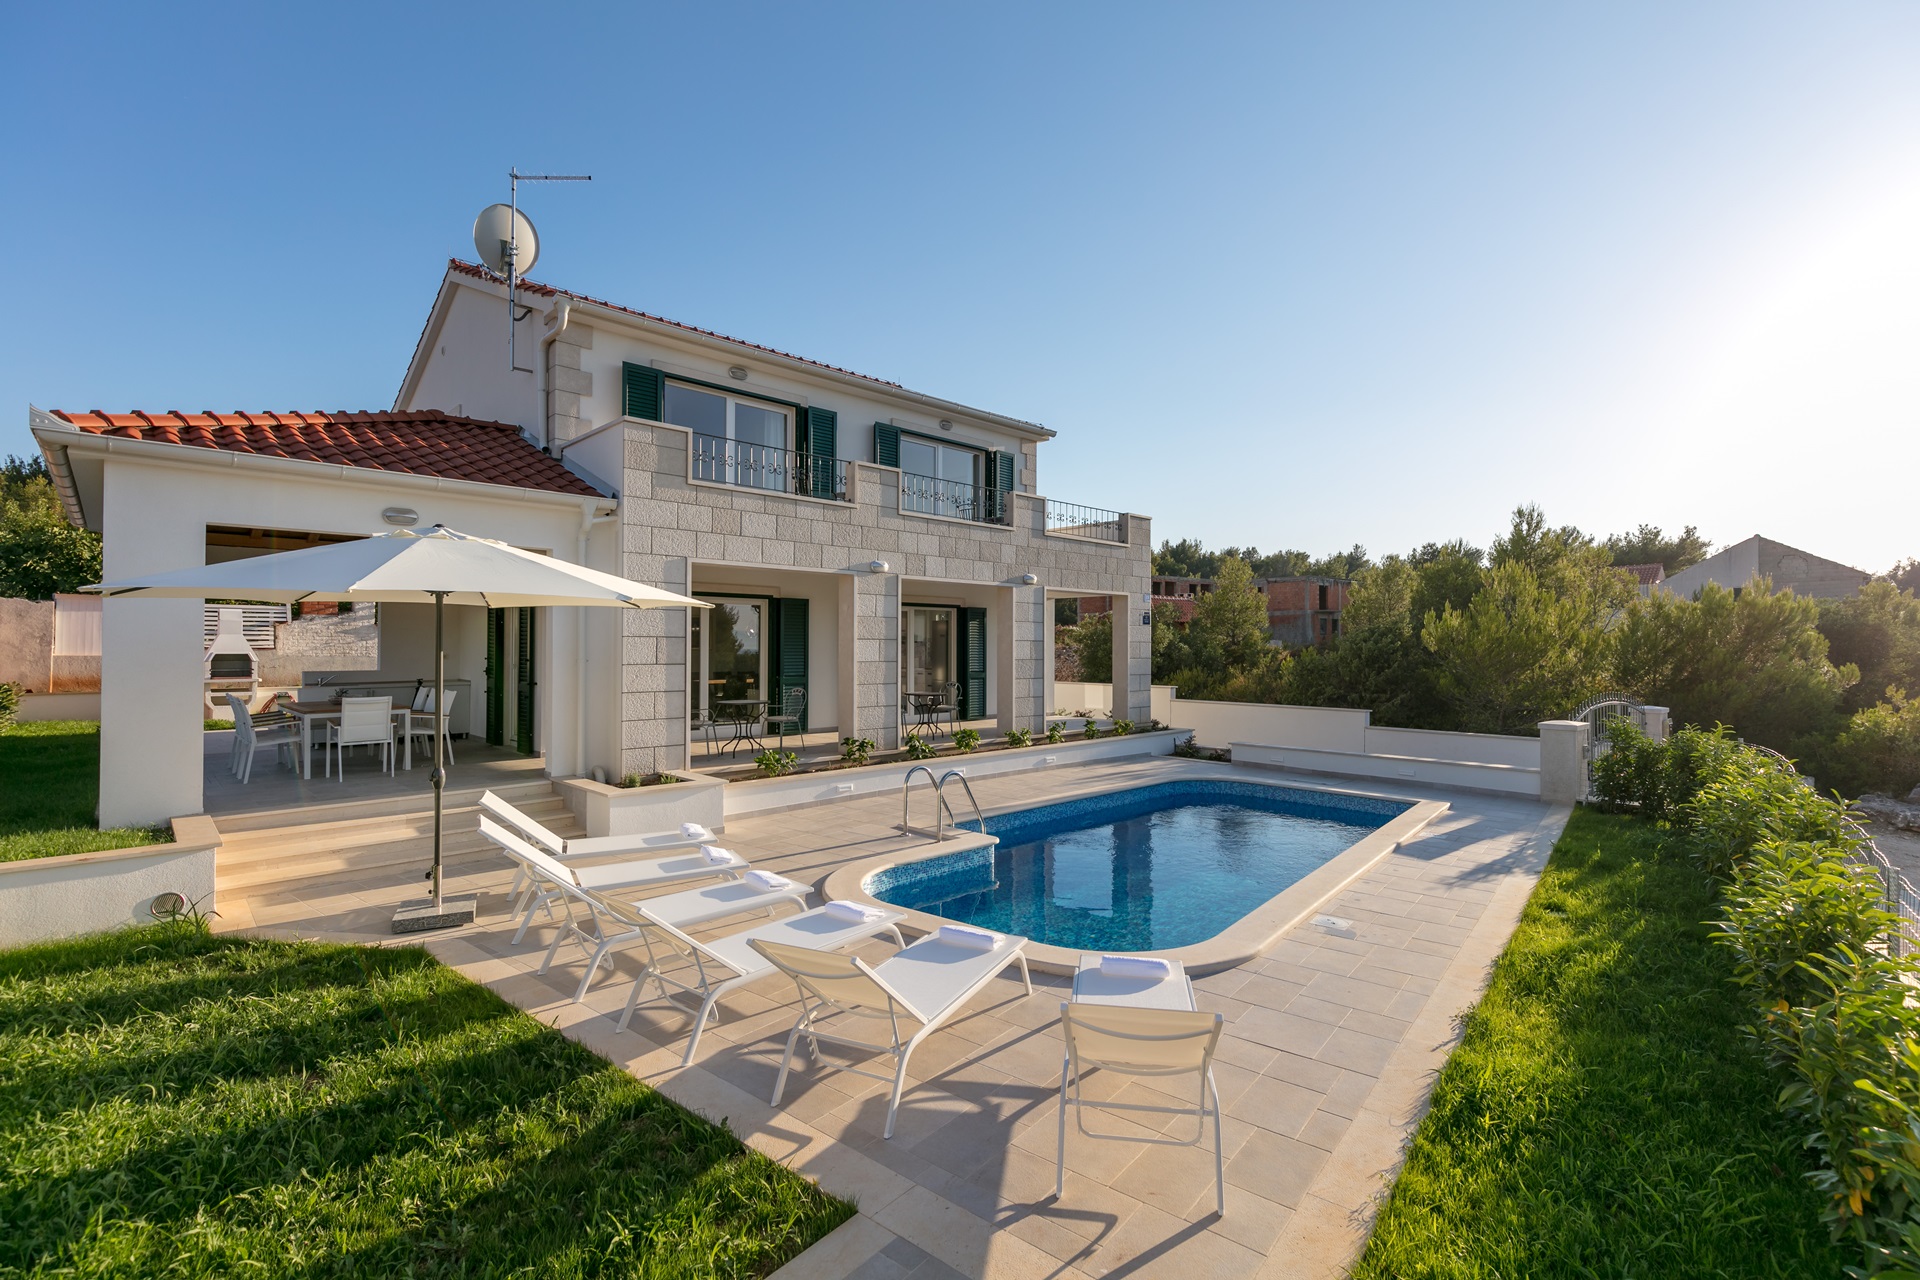 Charming villa, with pool, a few steps from the beach